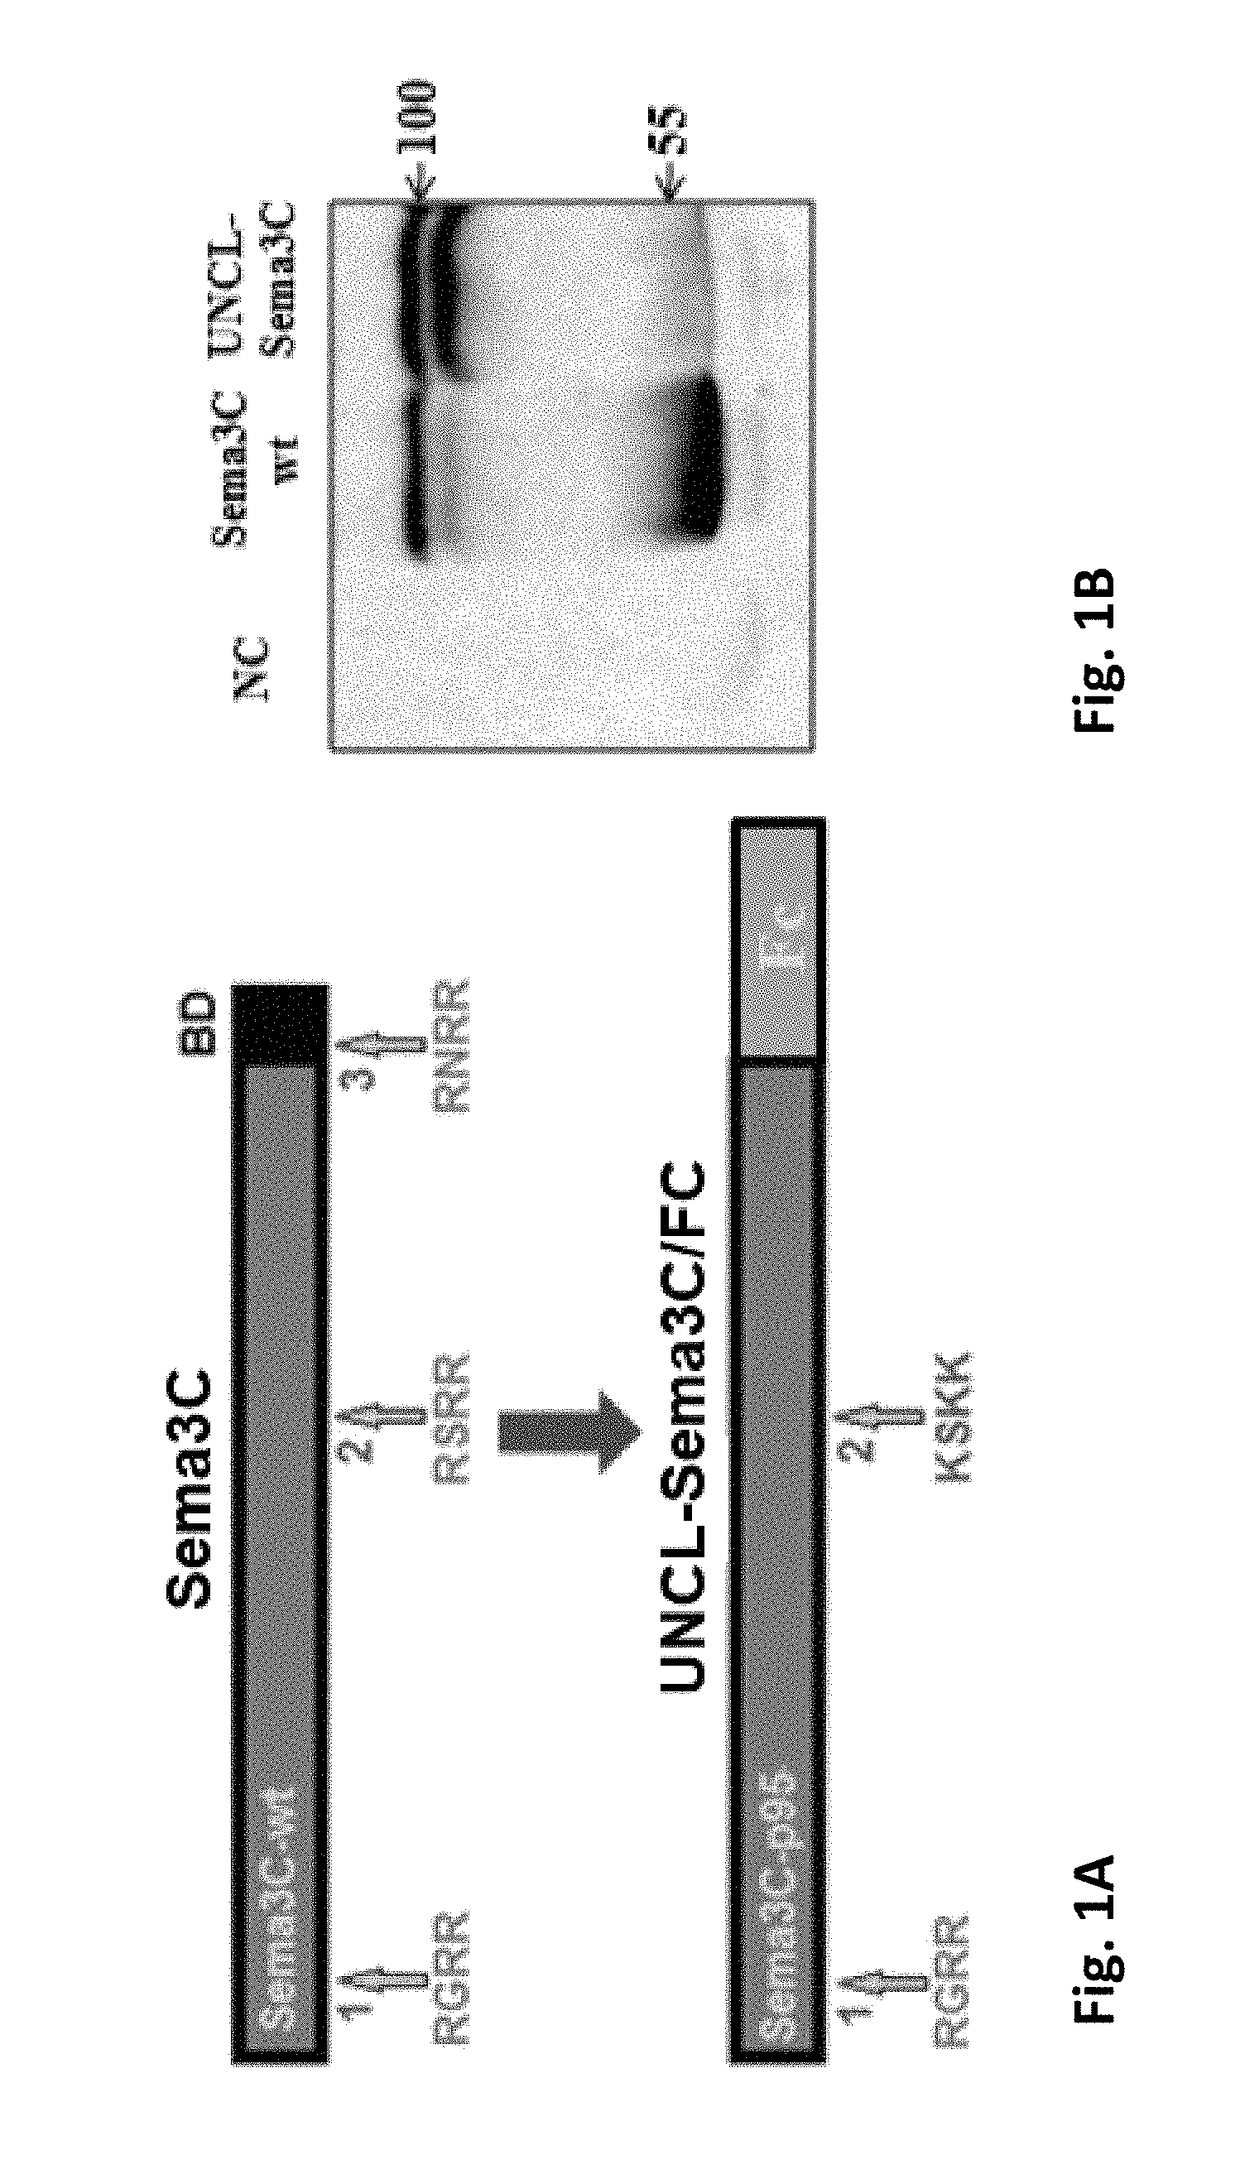 Semaphorin 3c variants, compositions comprising said variants and methods of use thereof in treating eye diseases